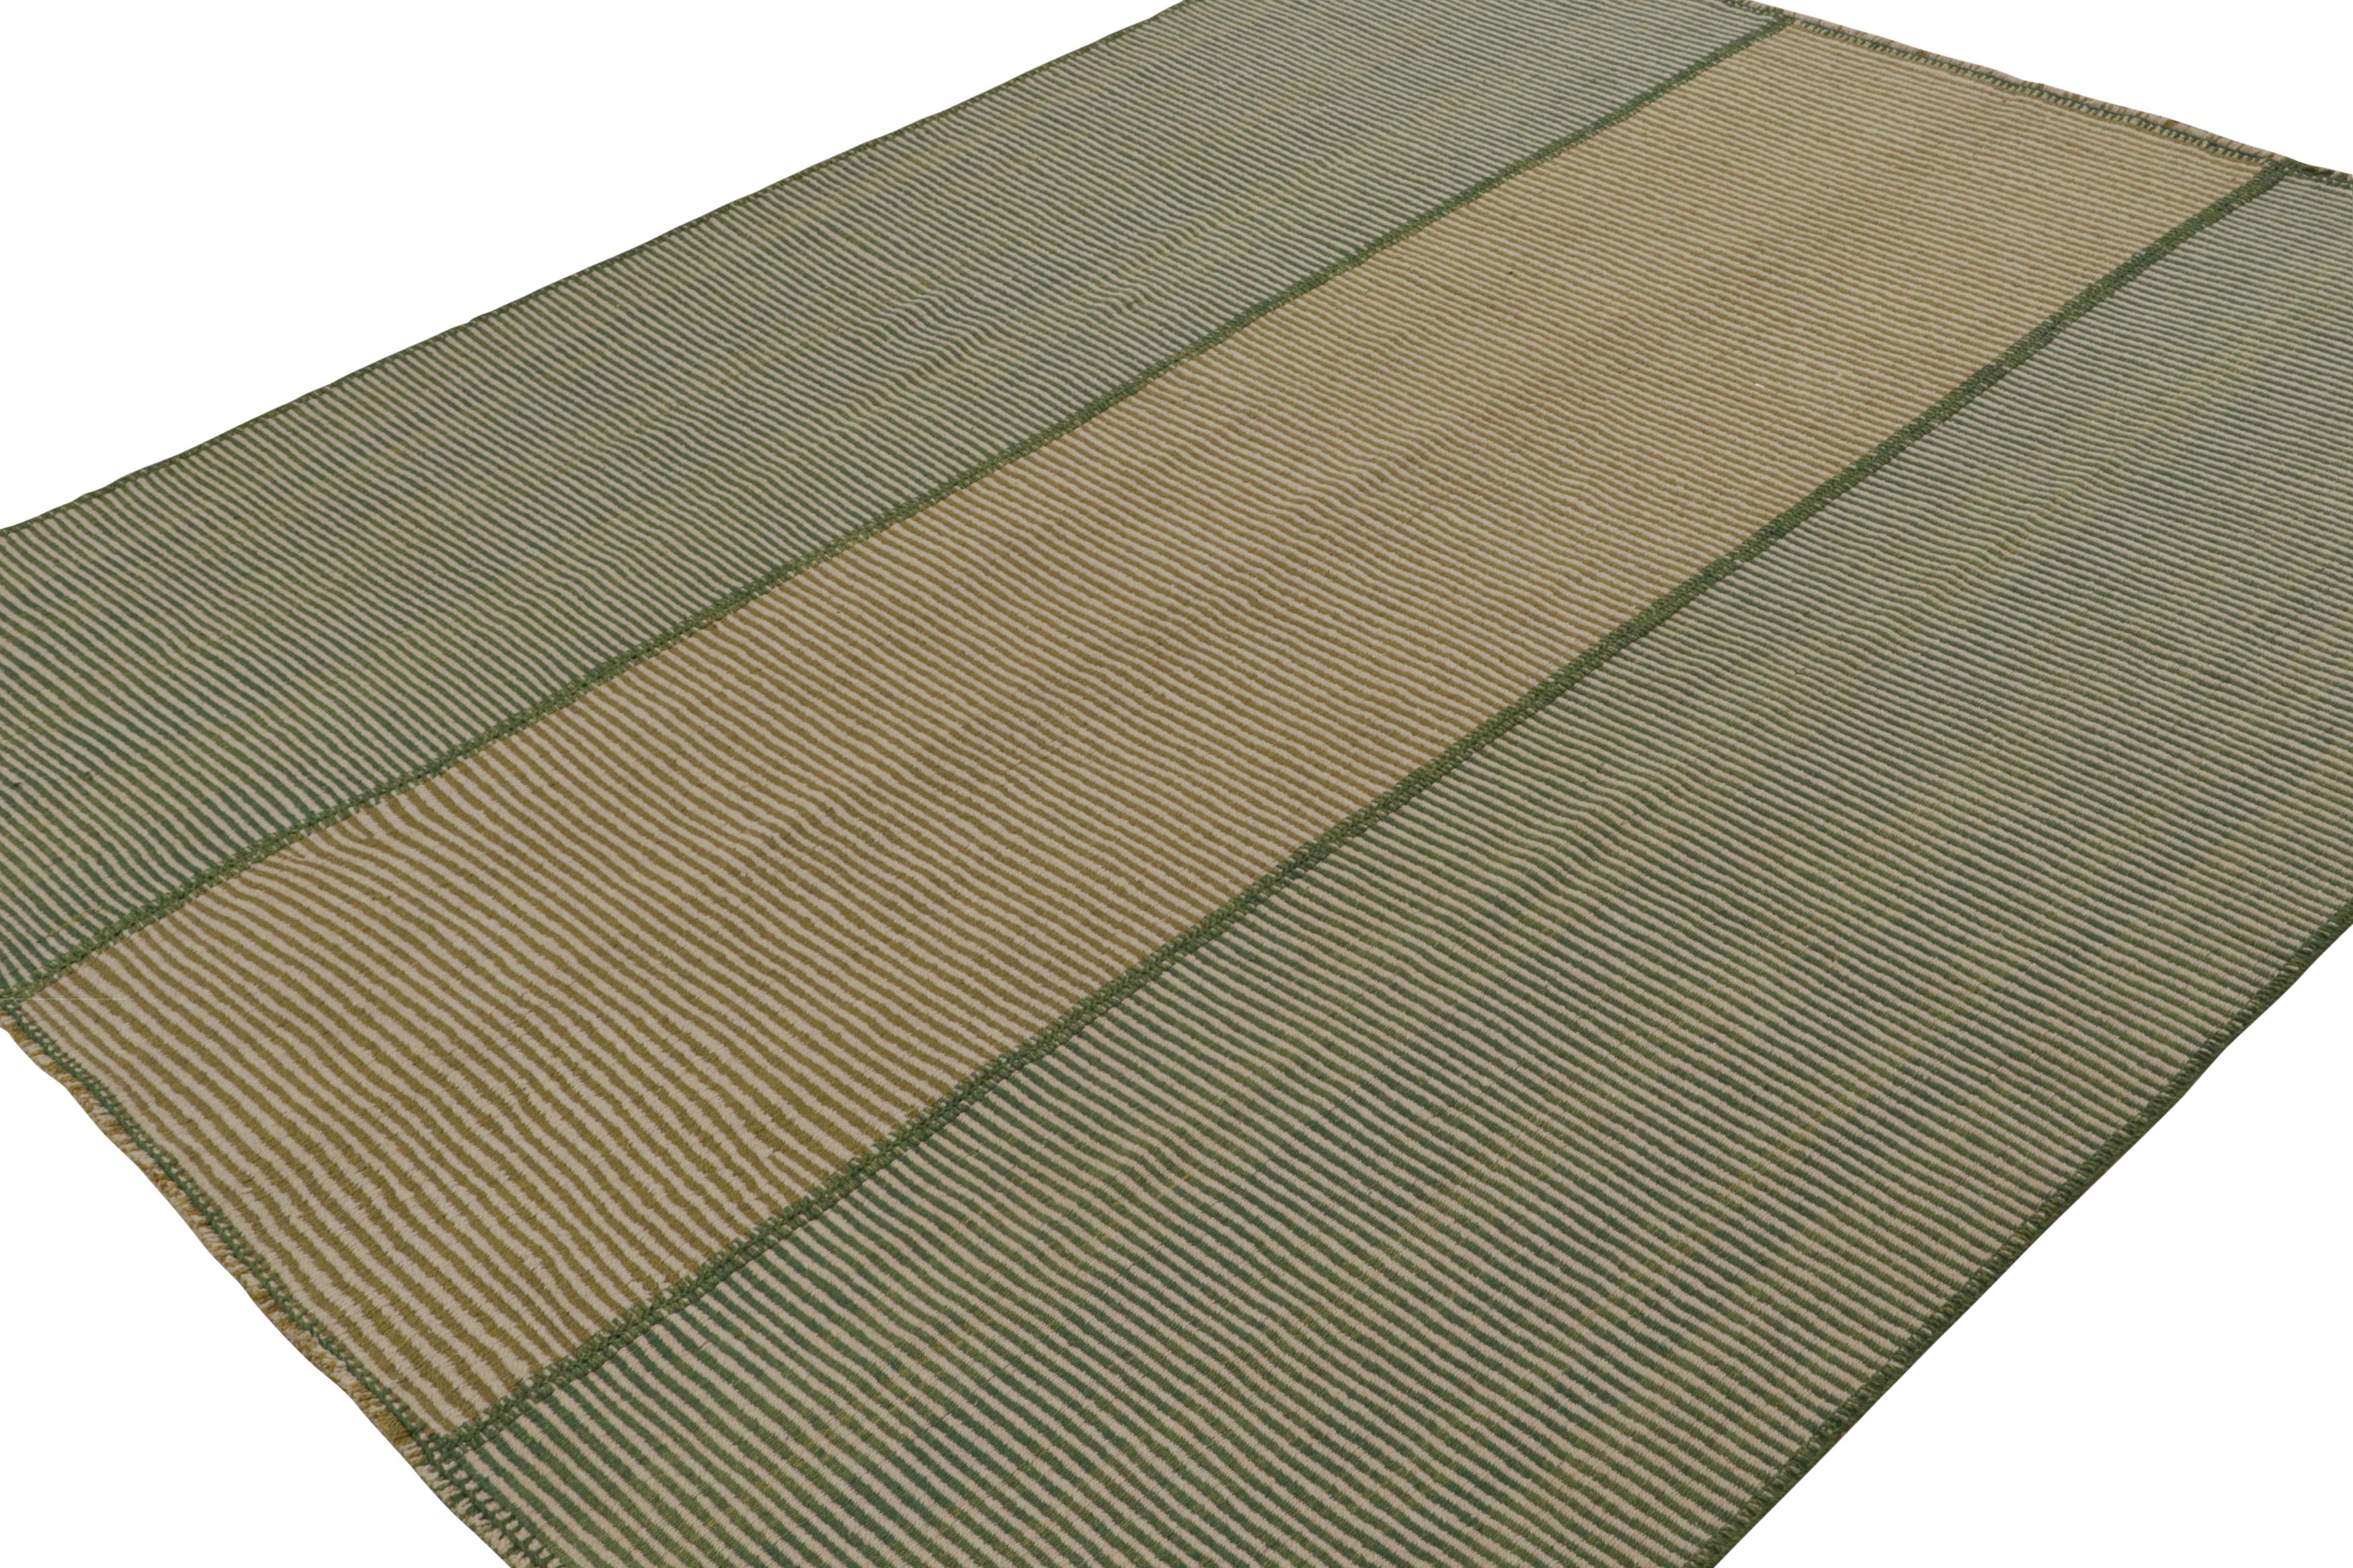 Handwoven in wool, a 9x11 Kilim design from an inventive new contemporary flat weave collection by Rug & Kilim.

On the Design: 

Fondly dubbed, “Rez Kilims”, this modern take on classic panel-weaving enjoys a fabulous, unique play of beige & green